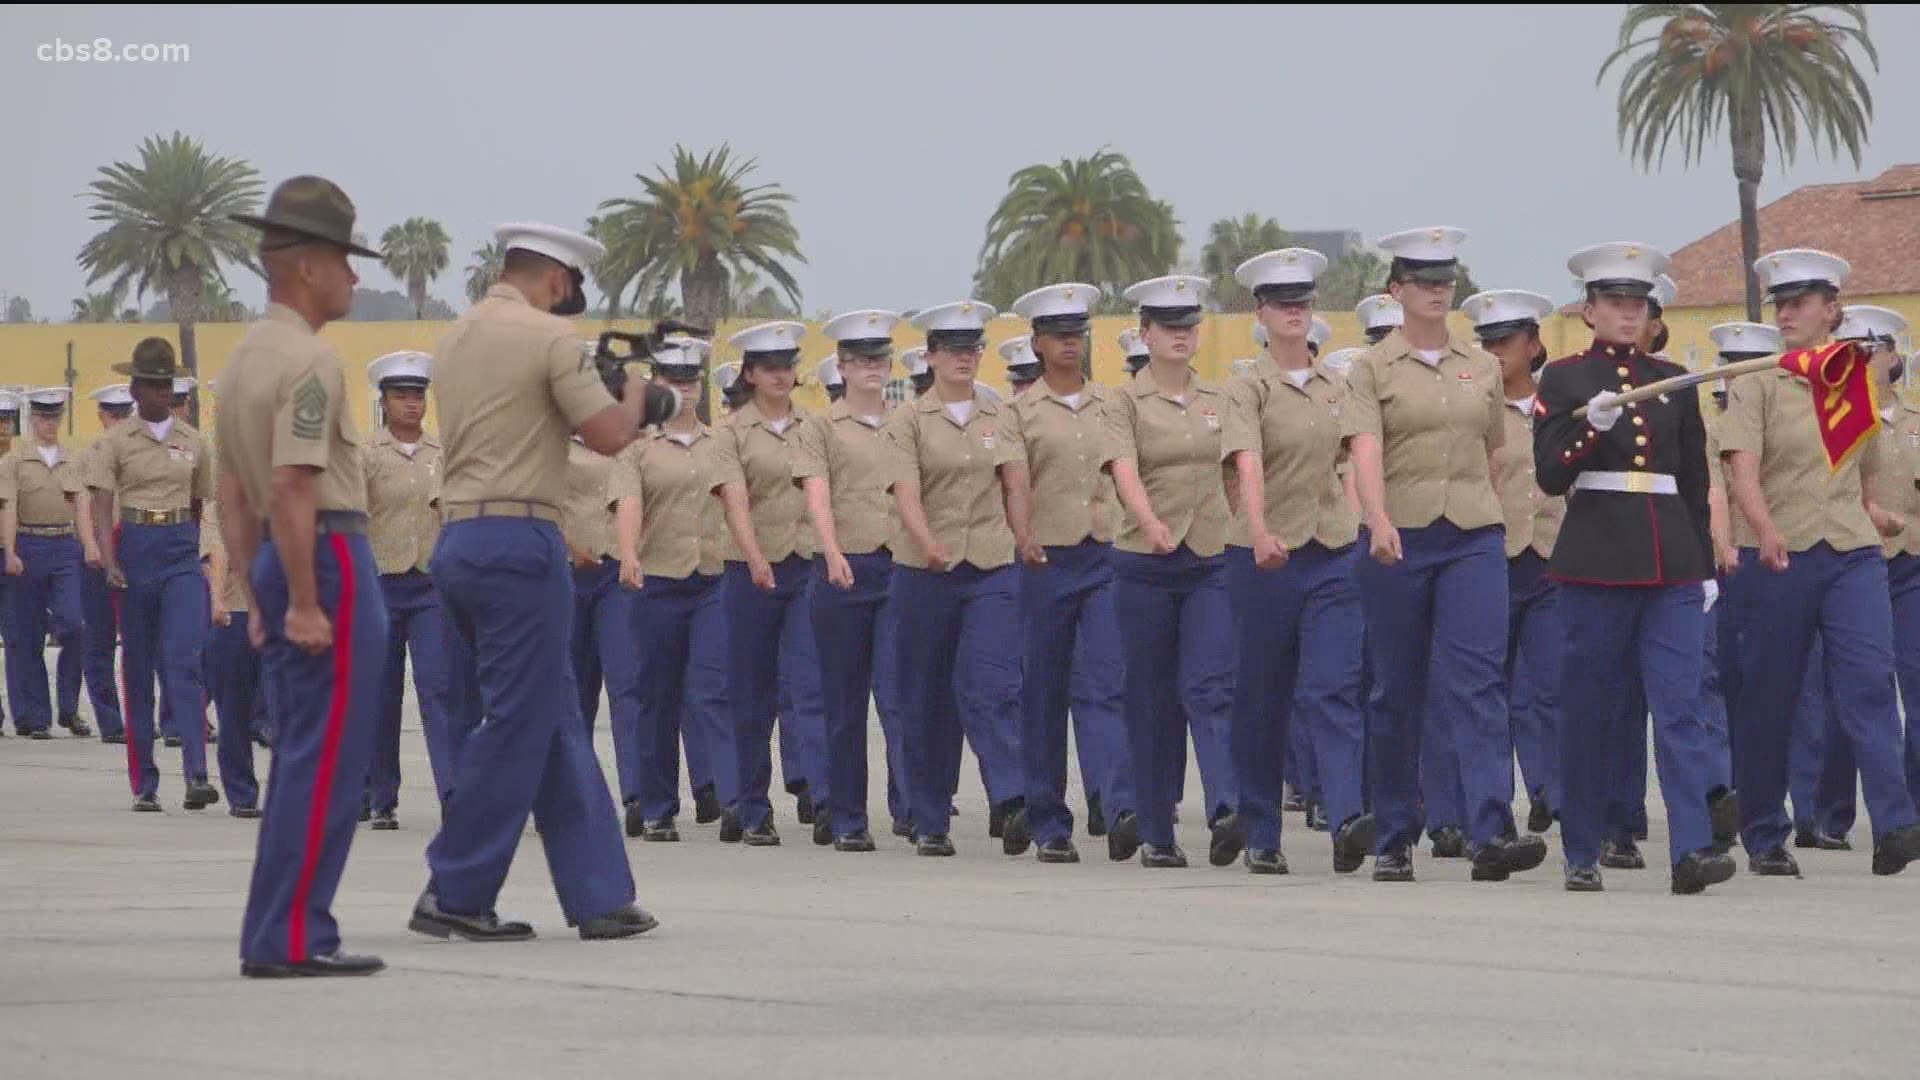 Graduation Day for first female Marines ever trained on West Coast